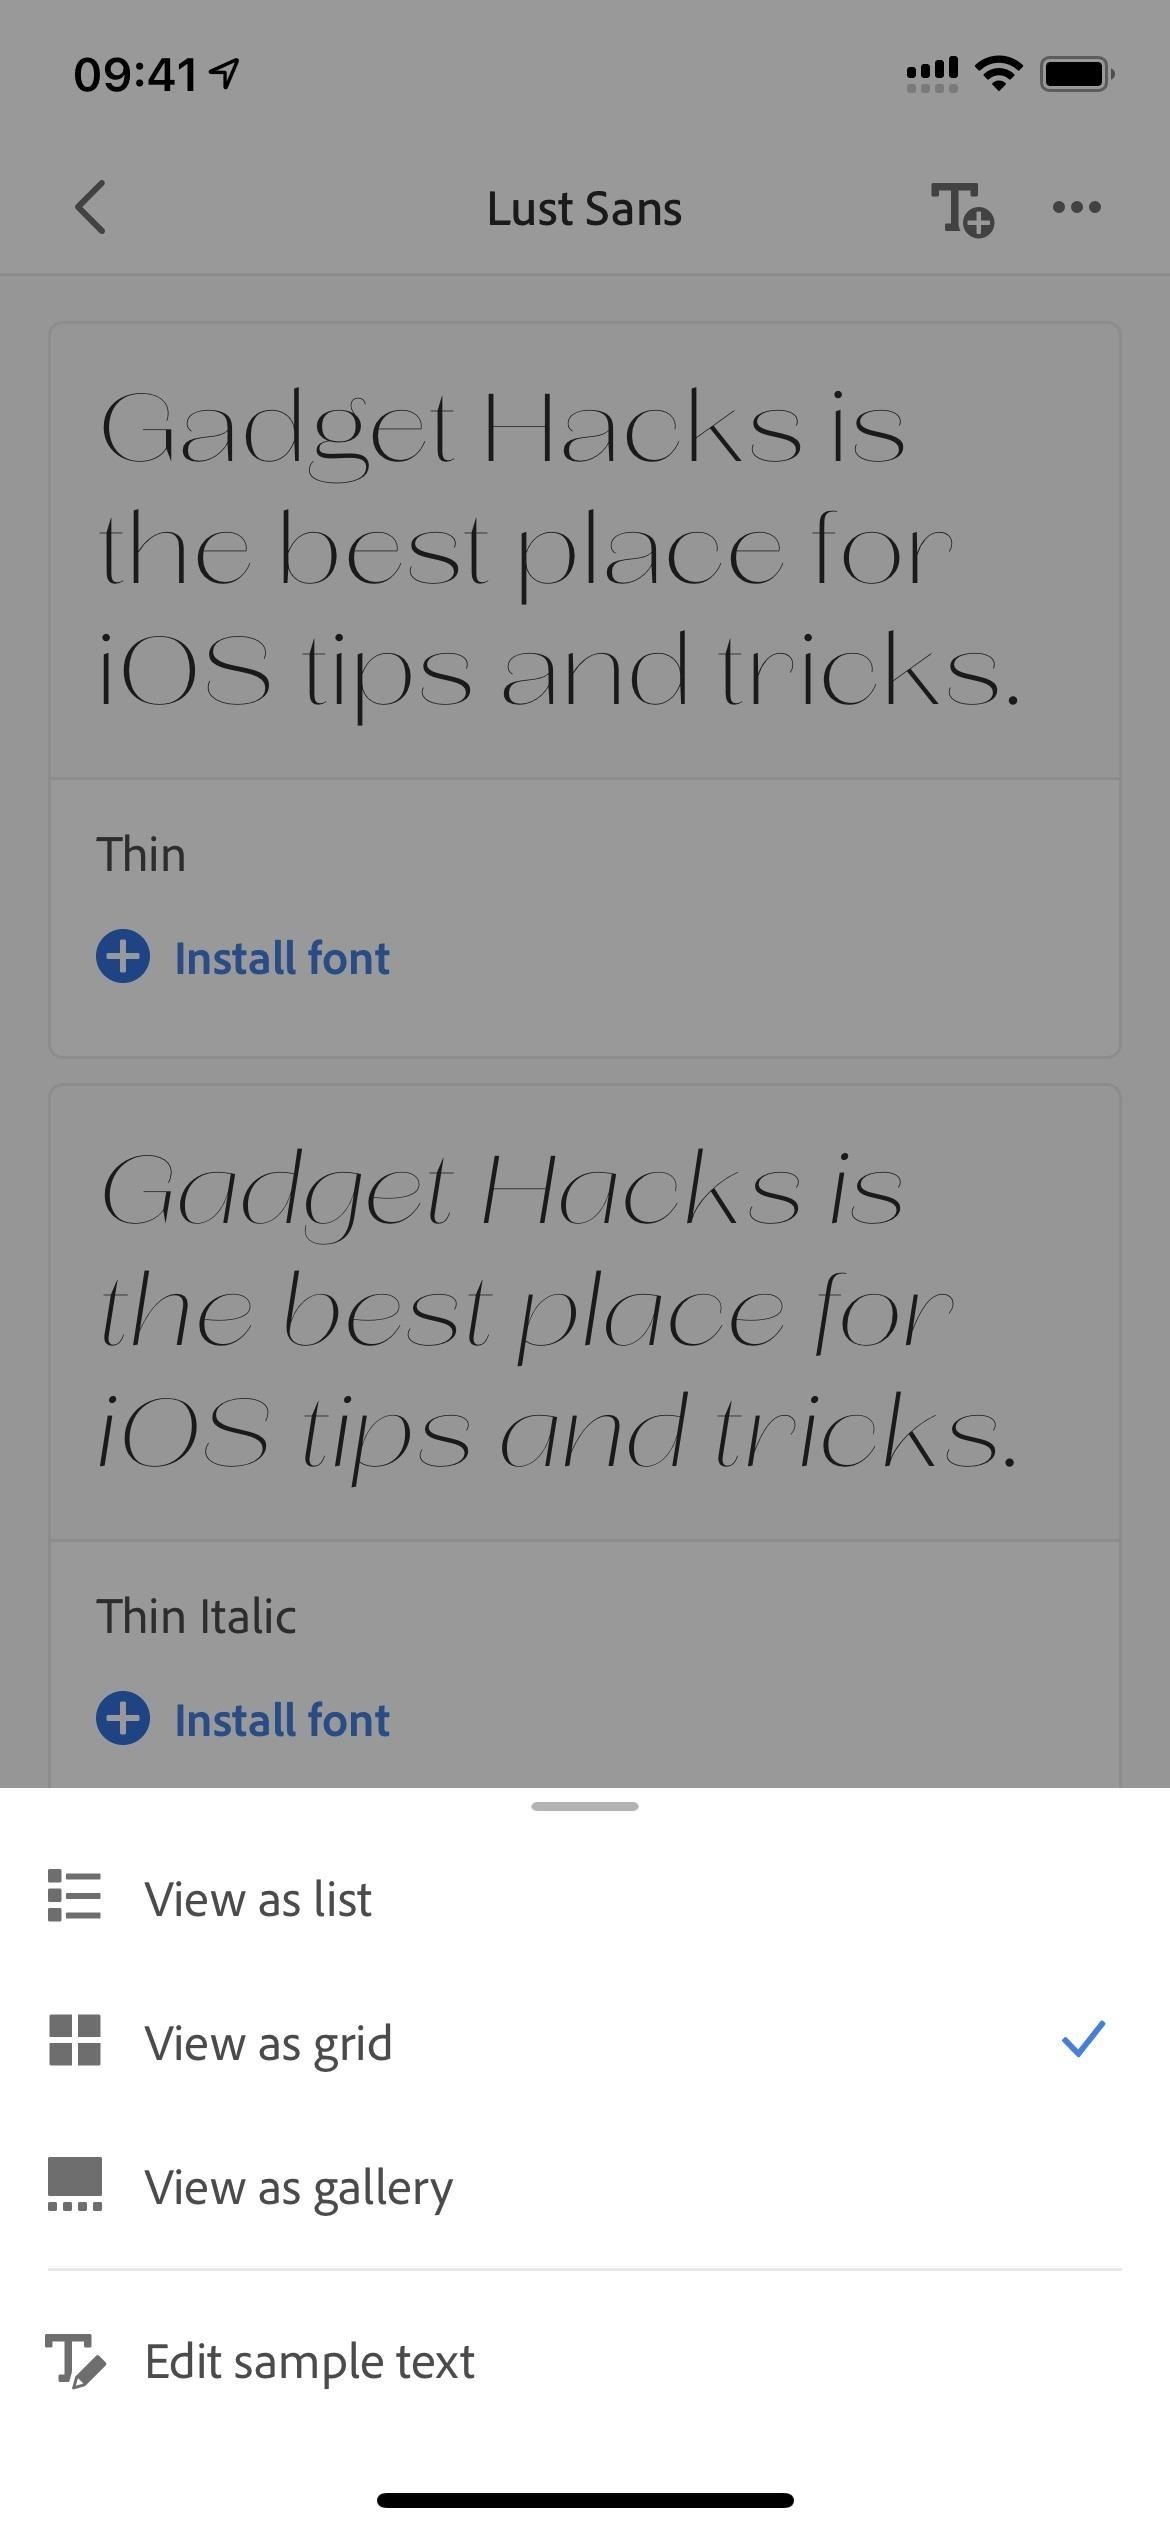 This App Gives You Thousands of Free Custom Fonts for Your iPhone's Stock Keyboard